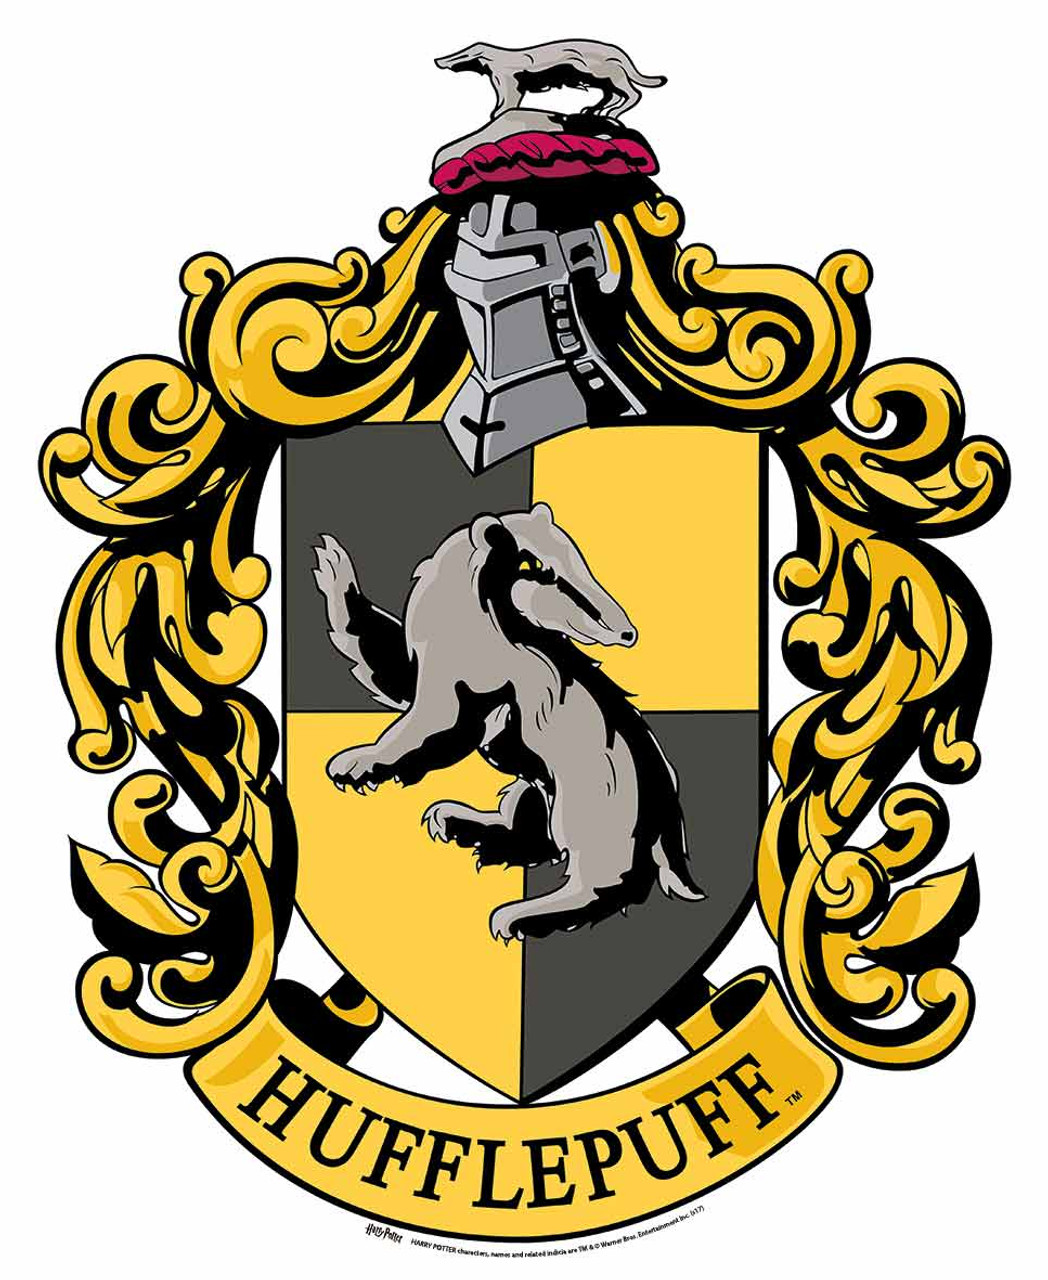 Harry-Potter-Hufflepuff-Crest-Official-wall-mounted-cardboard-cutout-buy-now-at-star__21122.1507644096.jpg